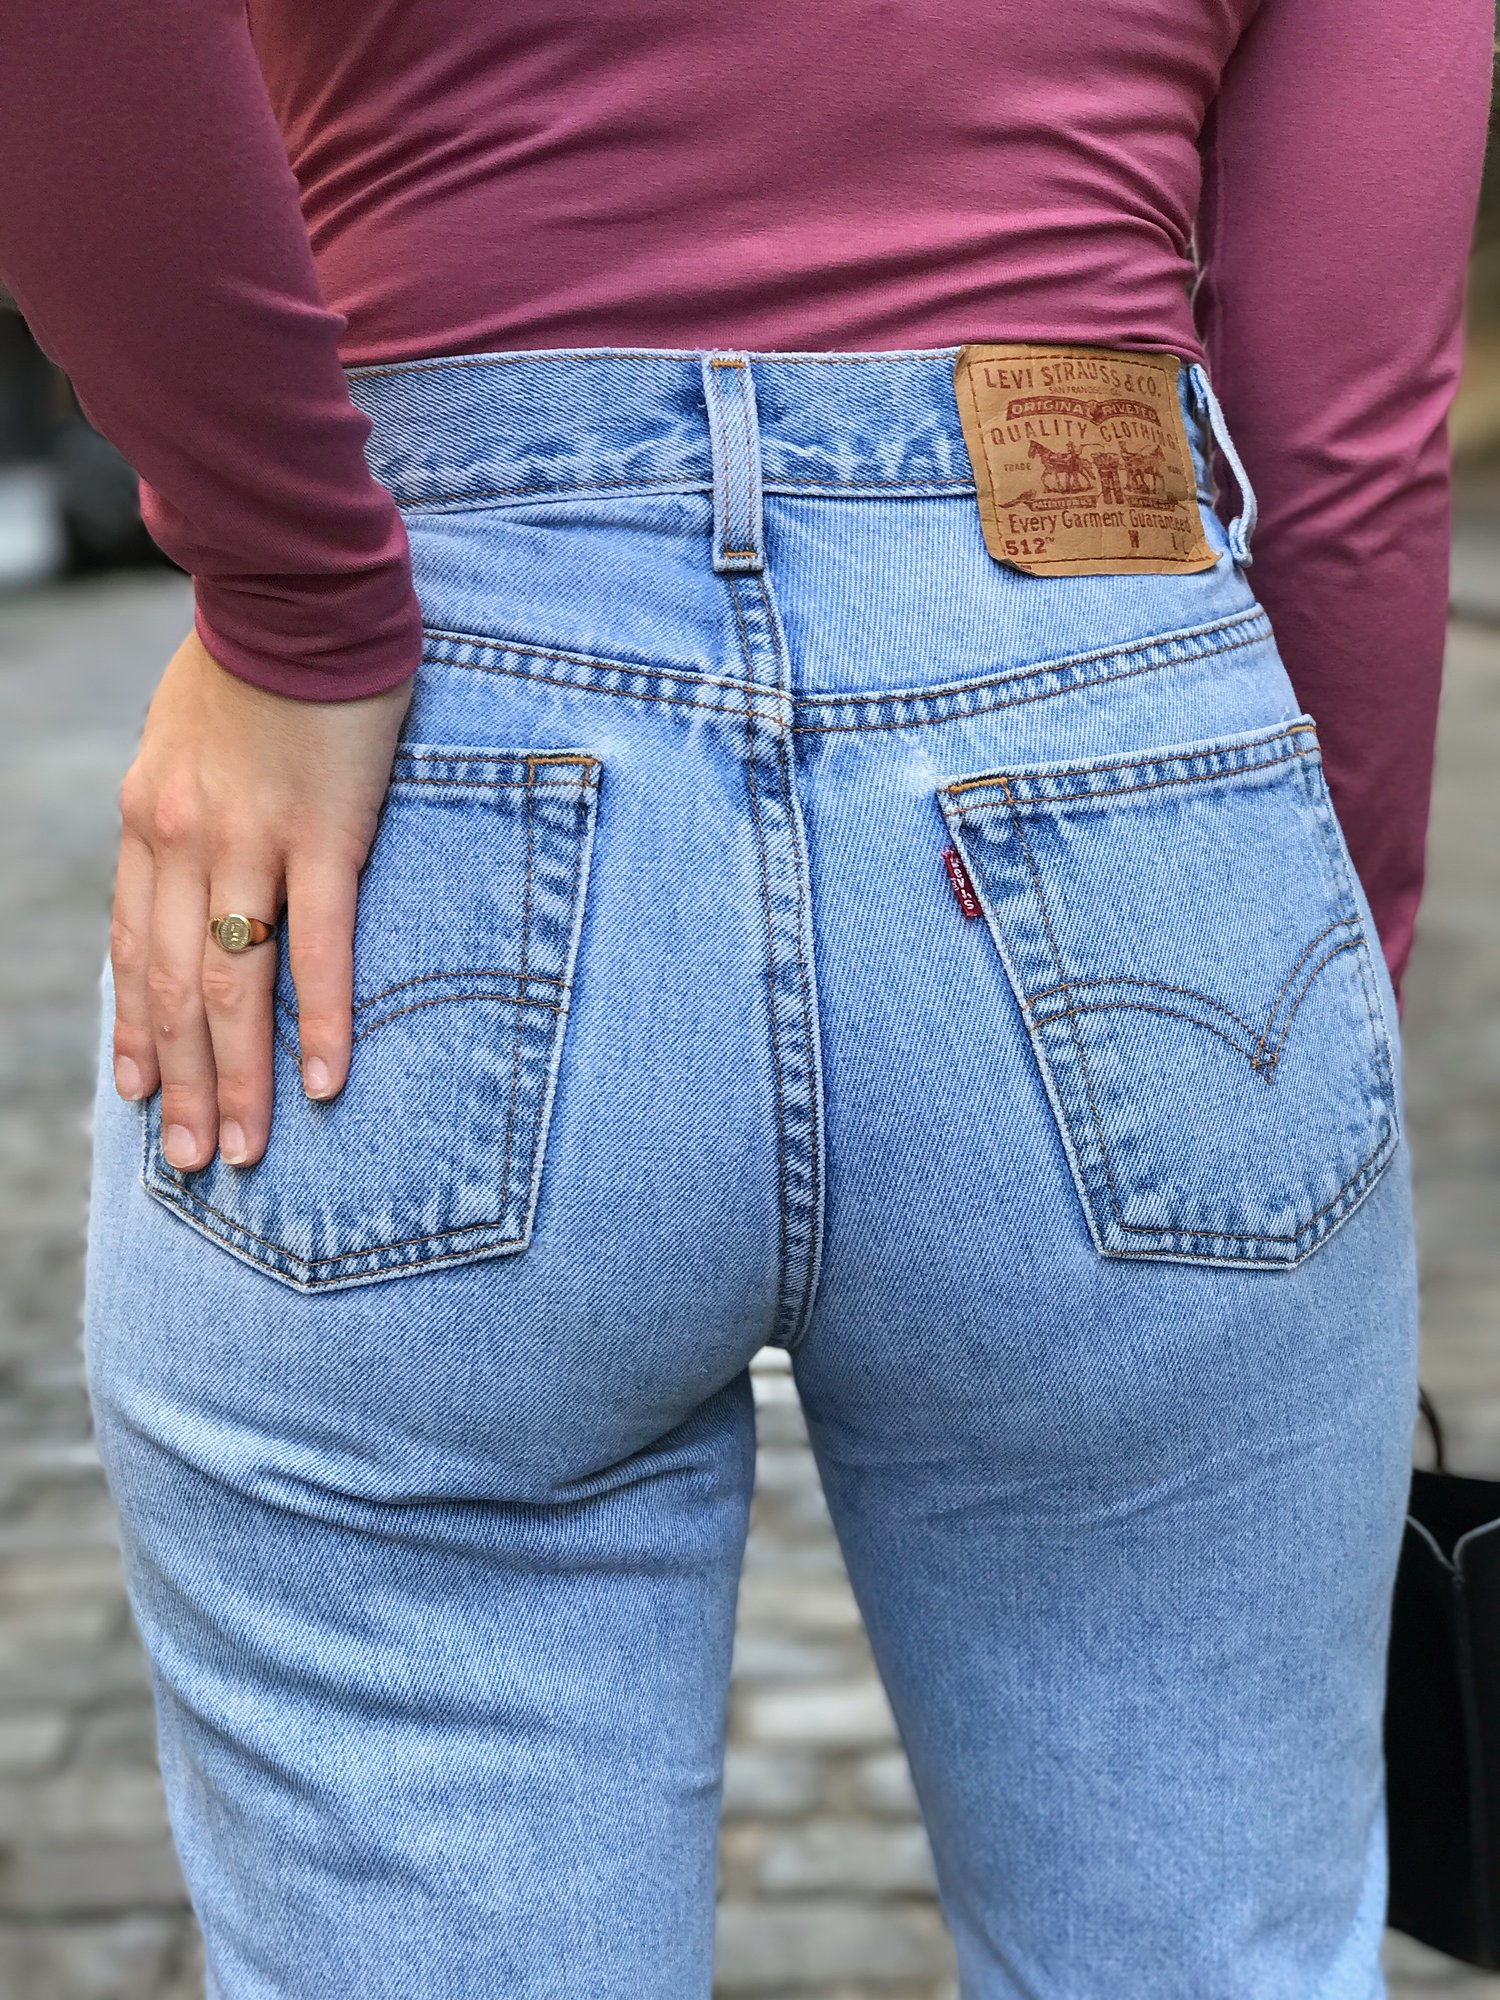 HOW TO SHOP FOR VINTAGE JEANS WHEN YOU'RE PETITE & CURVY — The Petite Pear  Project